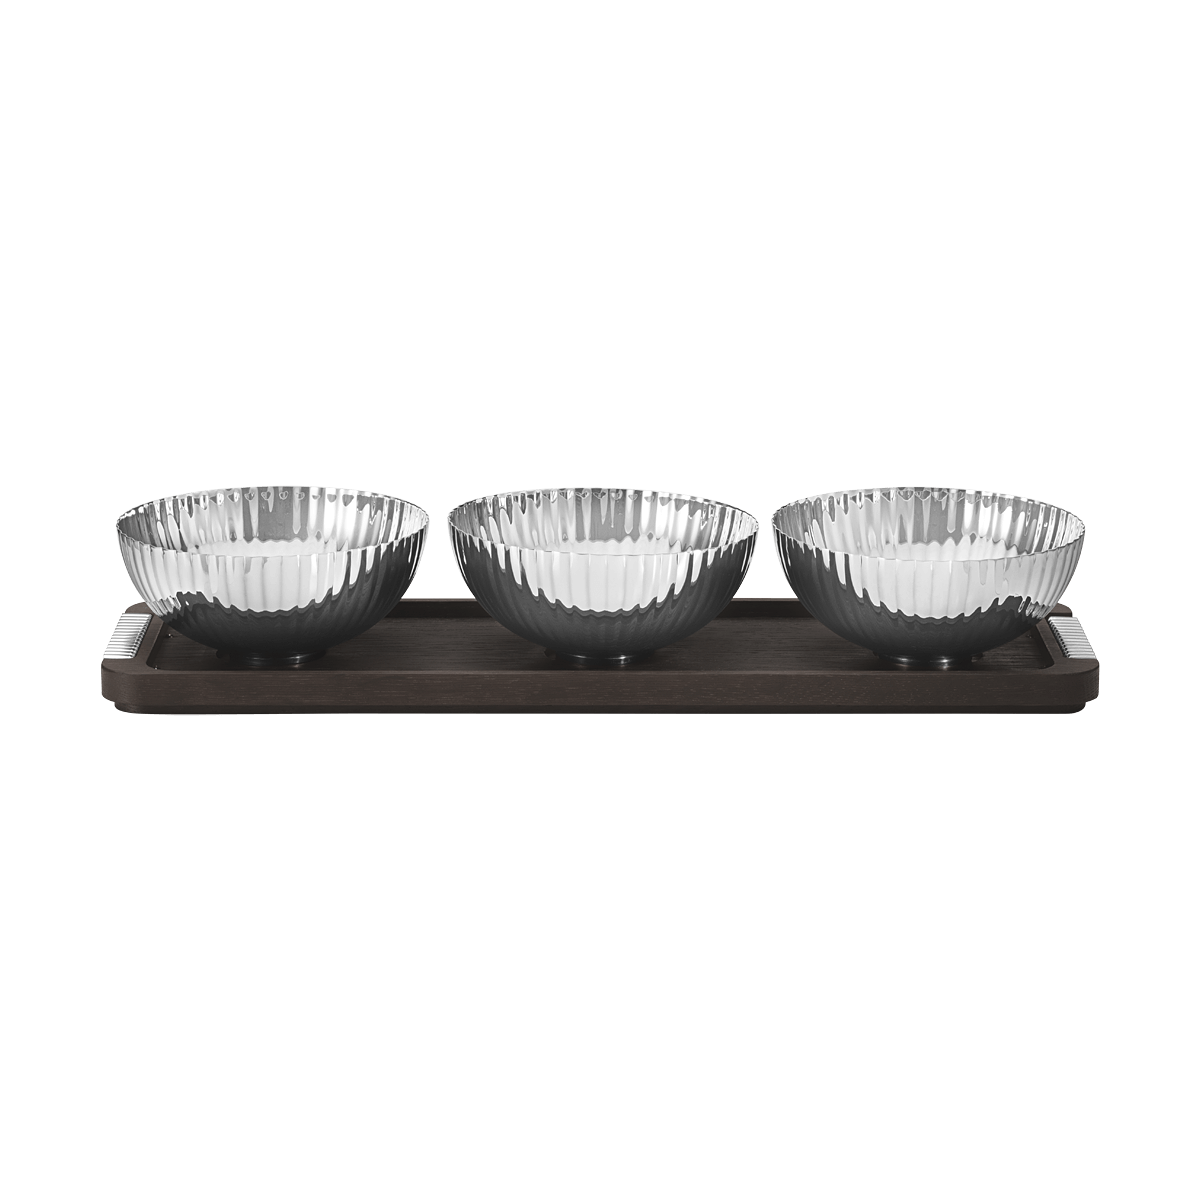 georg jensen bernadotte triple bowl set in stainless steel and wooden stand 10018216